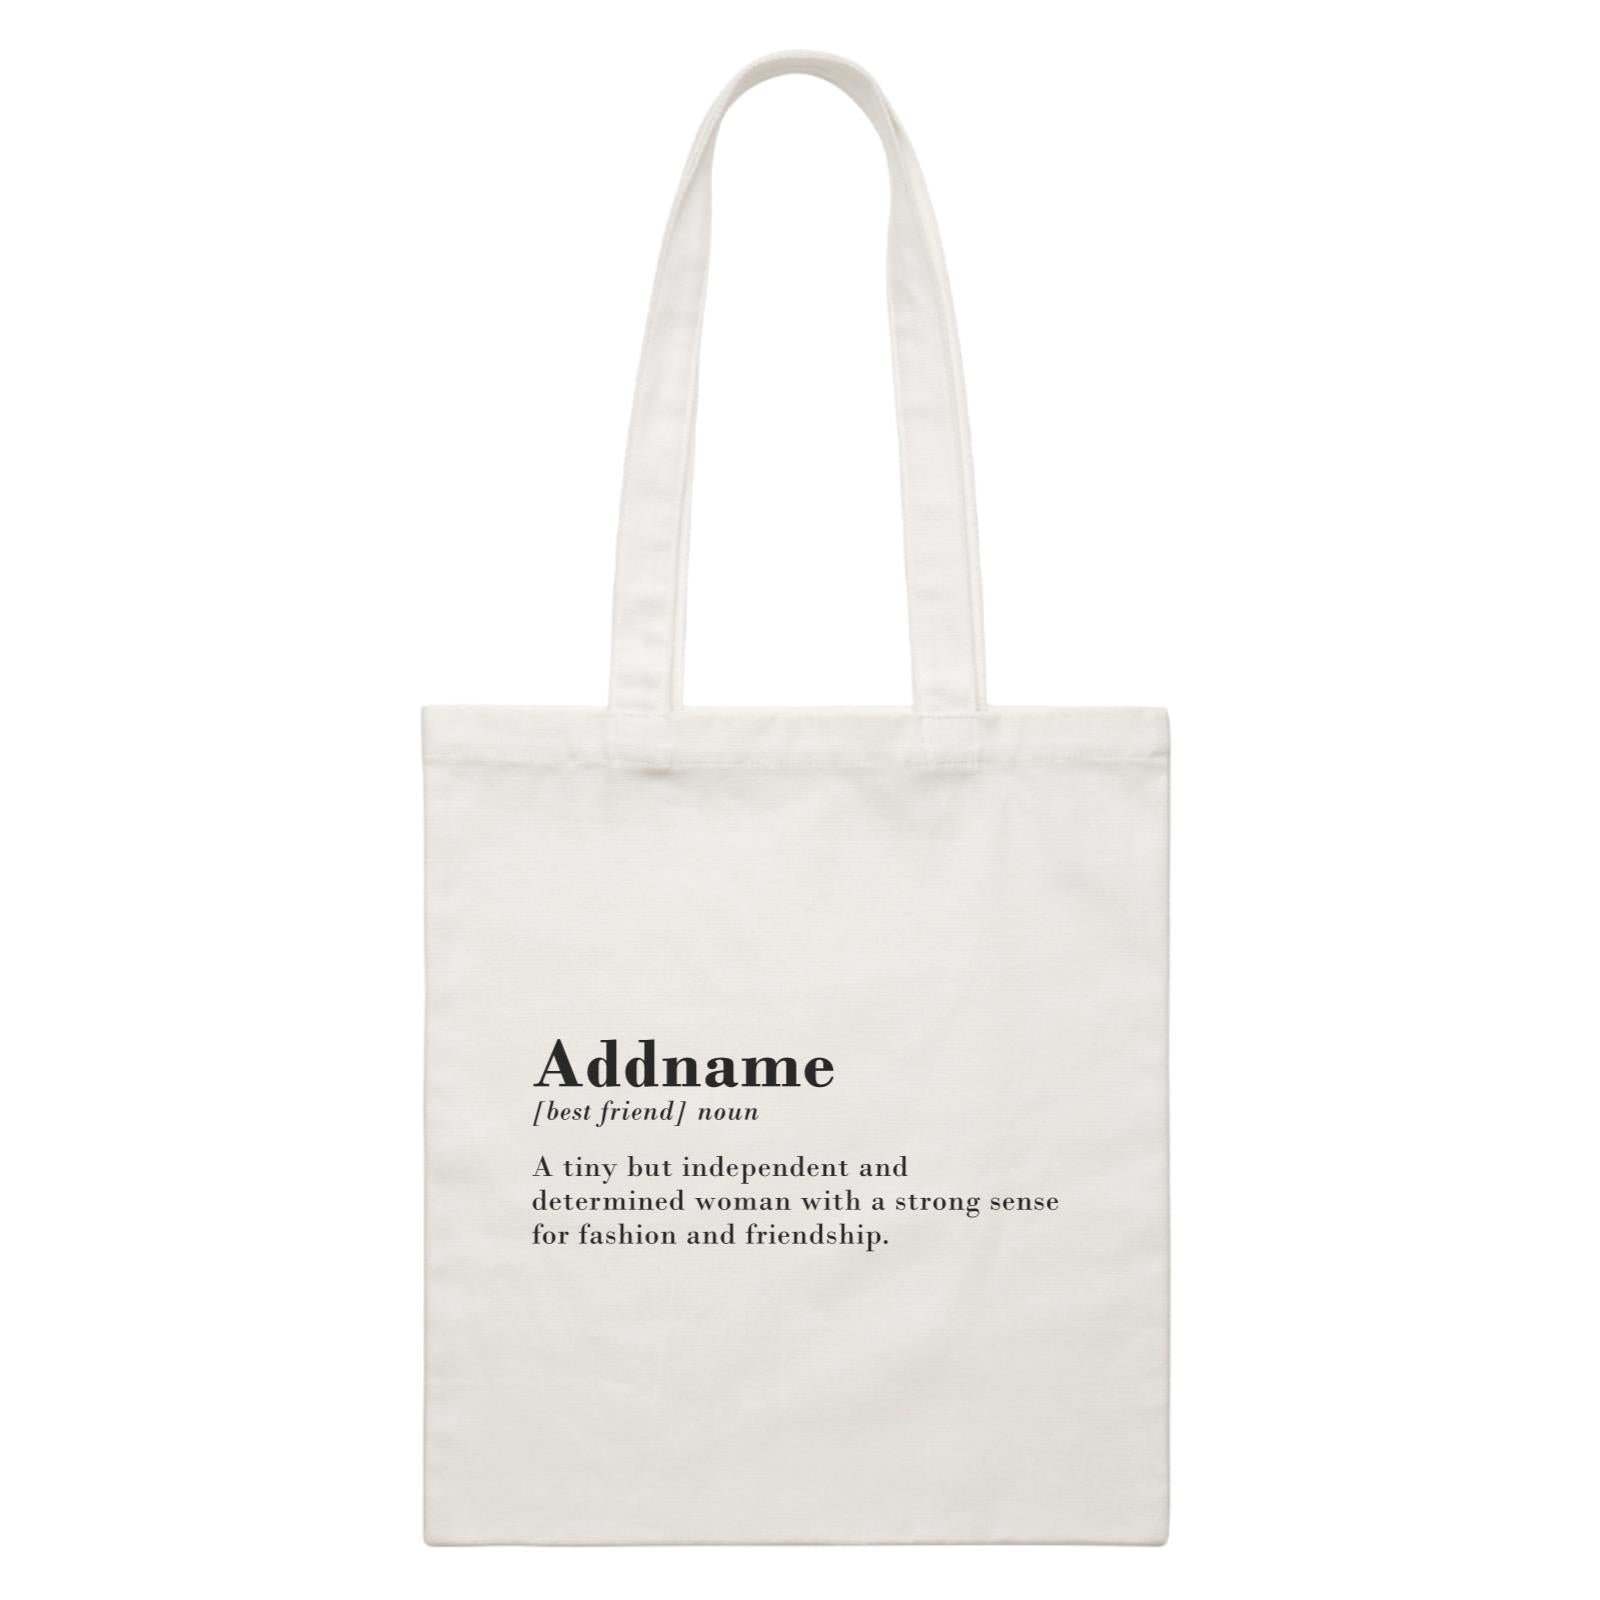 Best Friends Quotes Addname Best Friend Noun A Tiny But Independent And Determined Woman White Canvas Bag